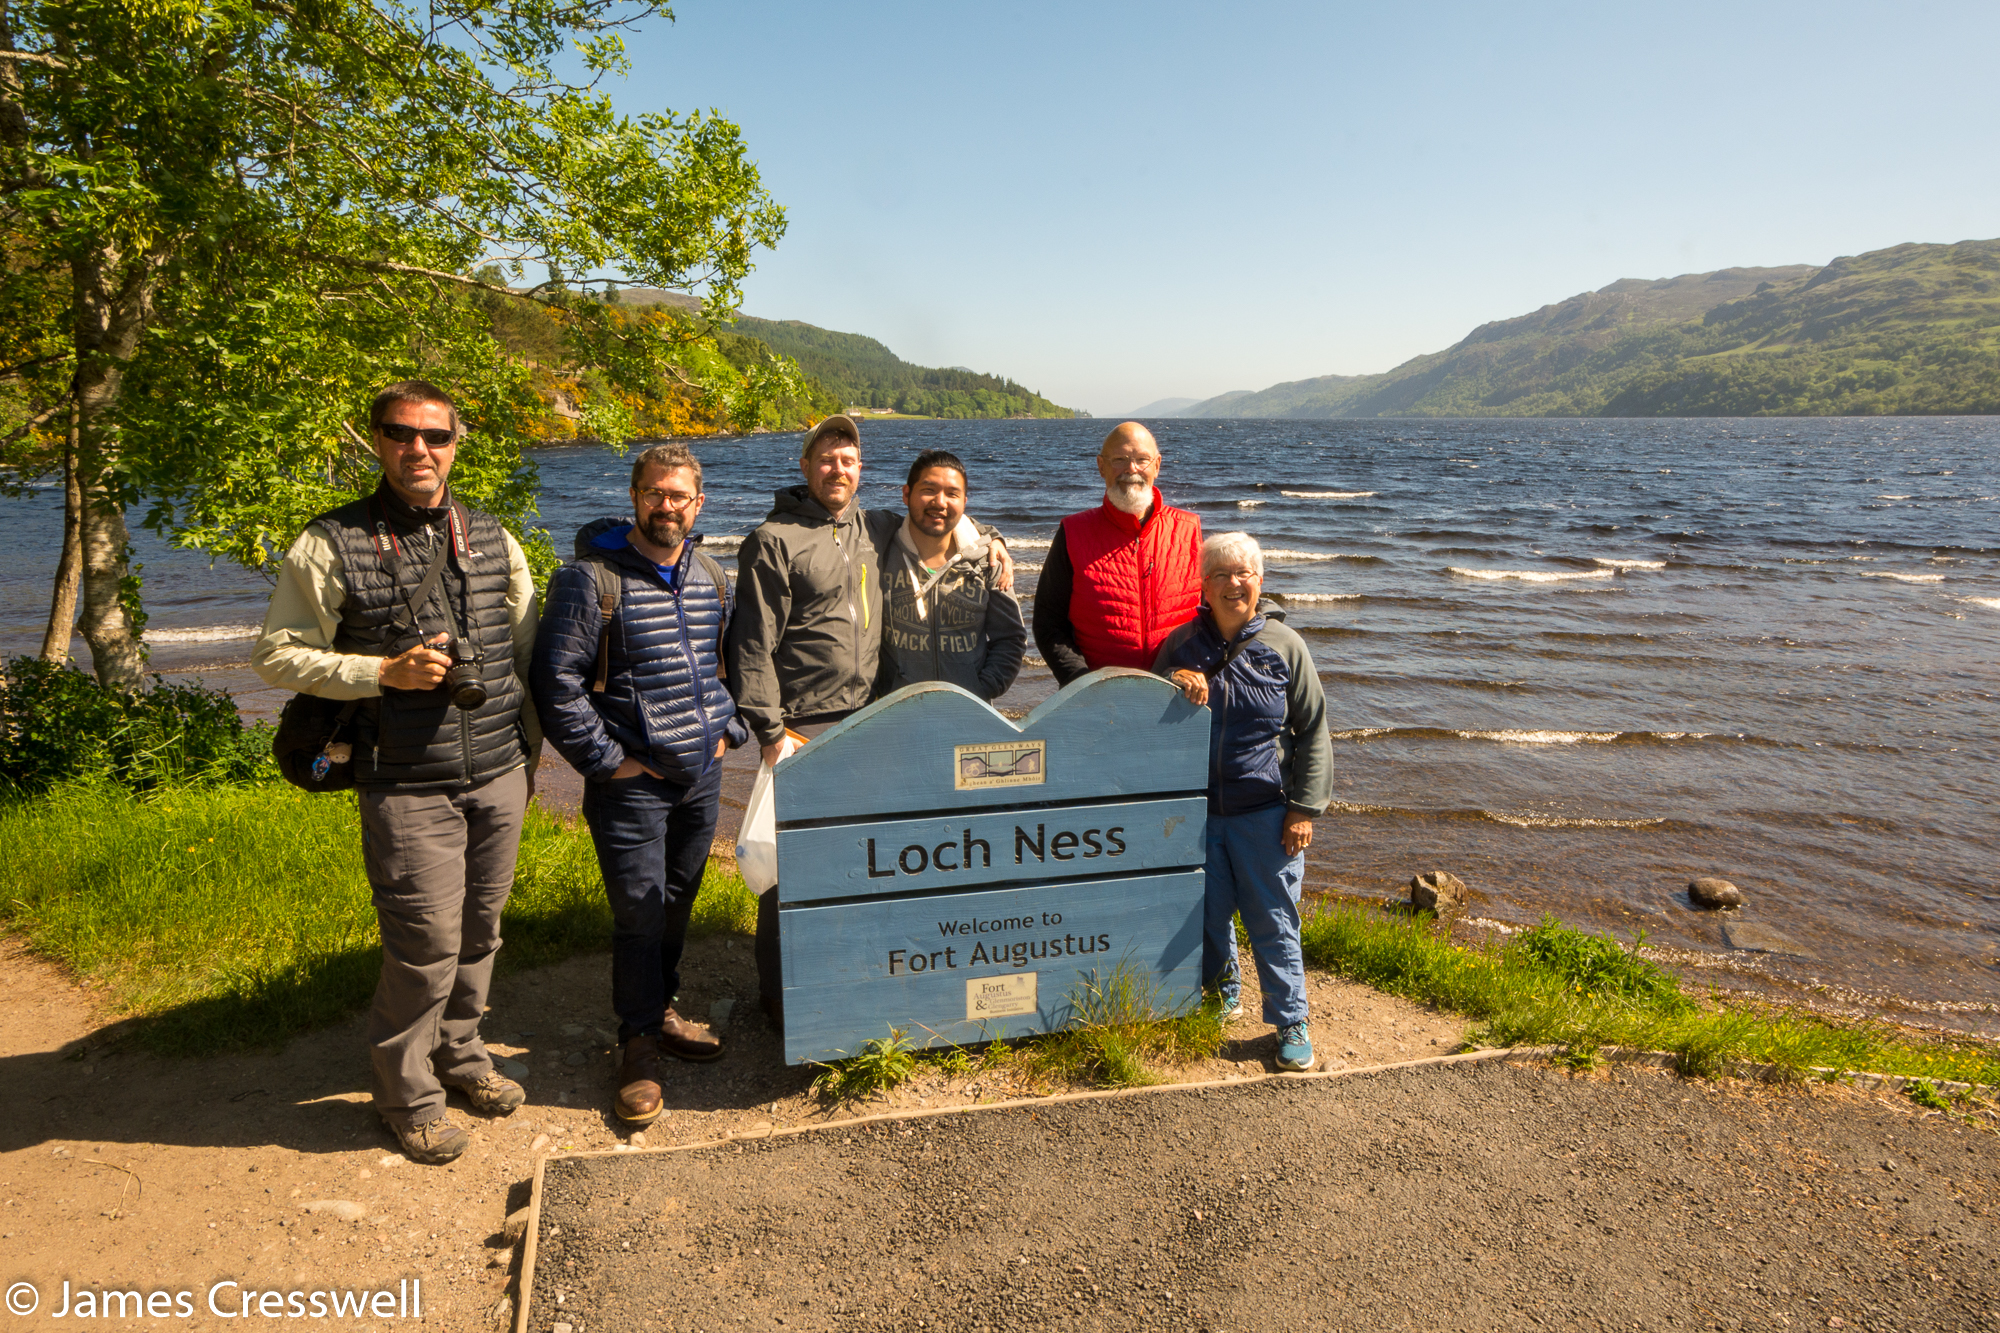 A photograph of six people standing next to the Loch Ness sign, with the loch in the background, taken on a GeoWorld Travel Scotland geology trip, tour and holiday